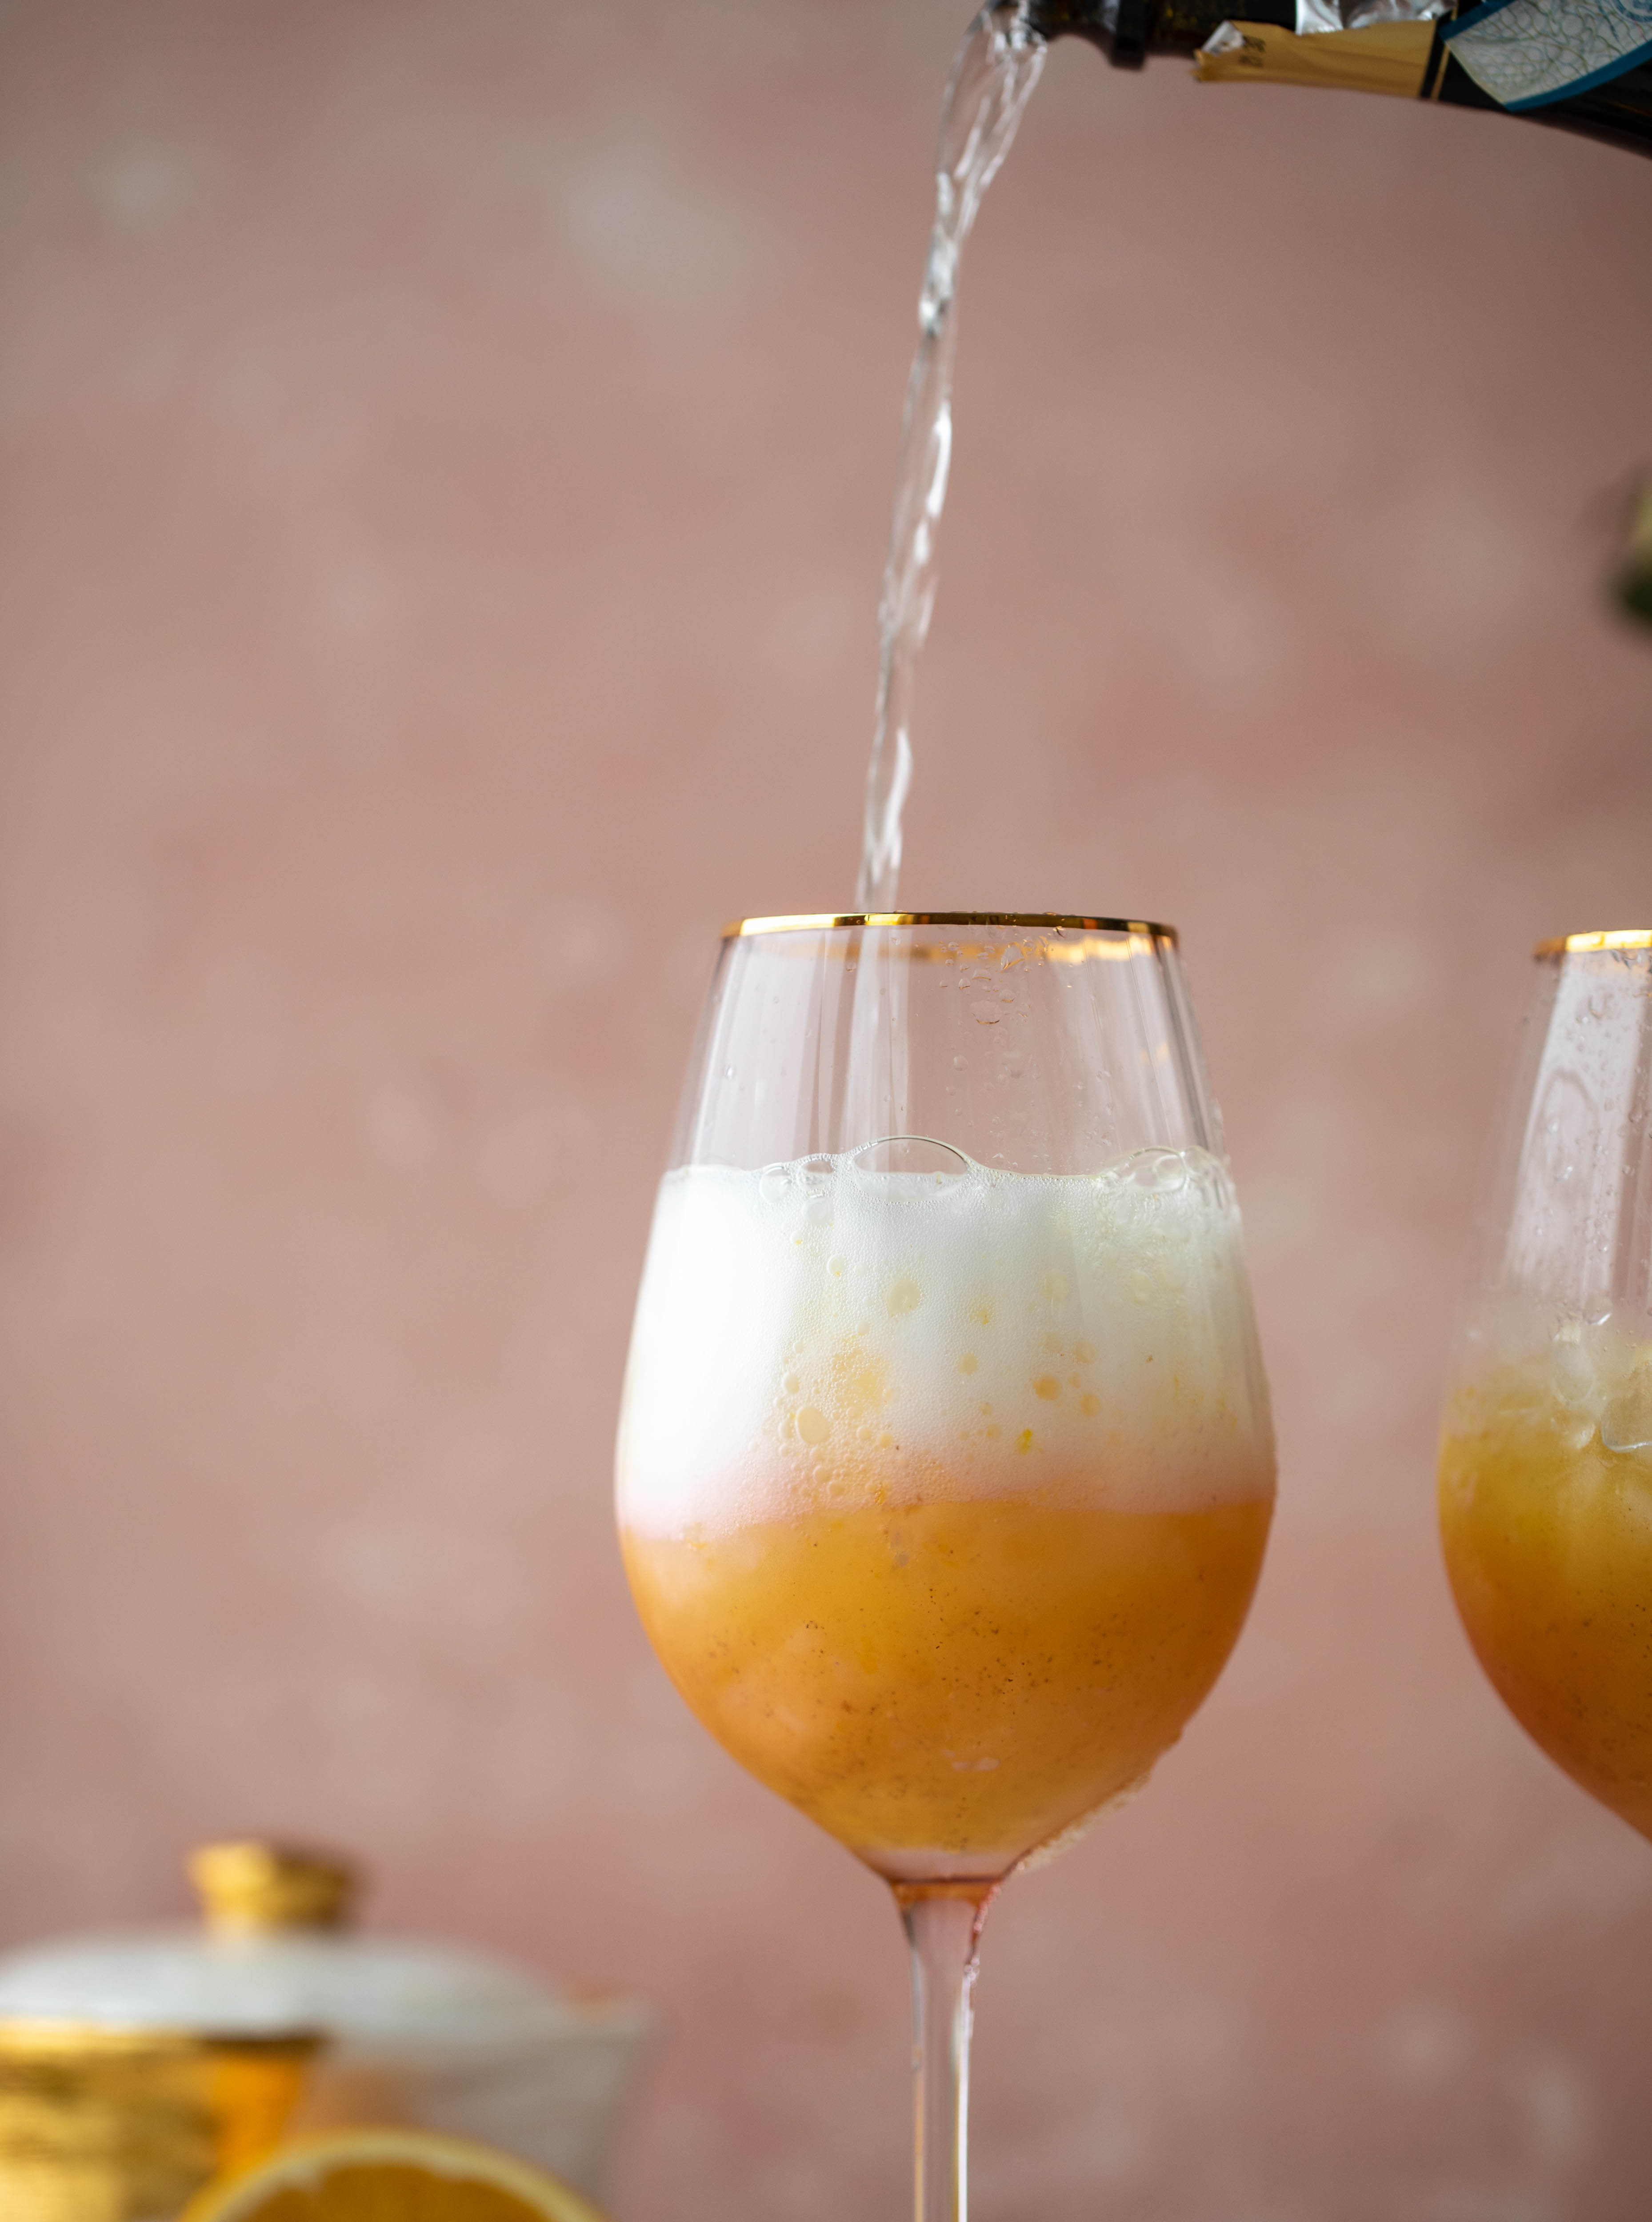 The spiced orange spritzer is a fancier mimosa and similar to an aperol spritz! A fresh spiced orange juice based mixed with prosecco and seltzer. So good!